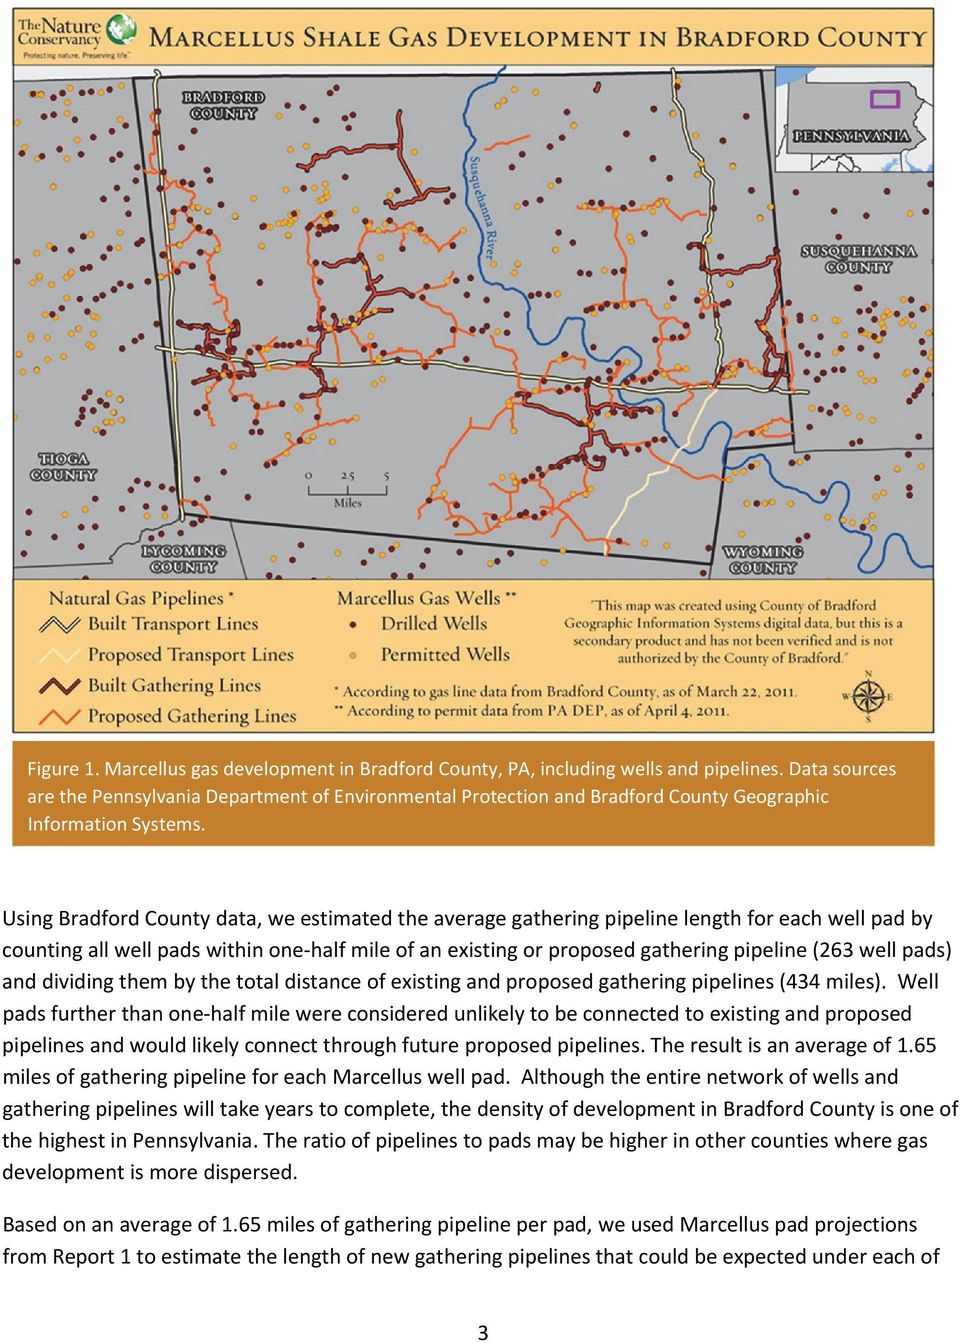 Using Bradford County data, we estimated the average gathering pipeline length for each well pad by counting all well pads within one half mile of an existing or proposed gathering pipeline (263 well